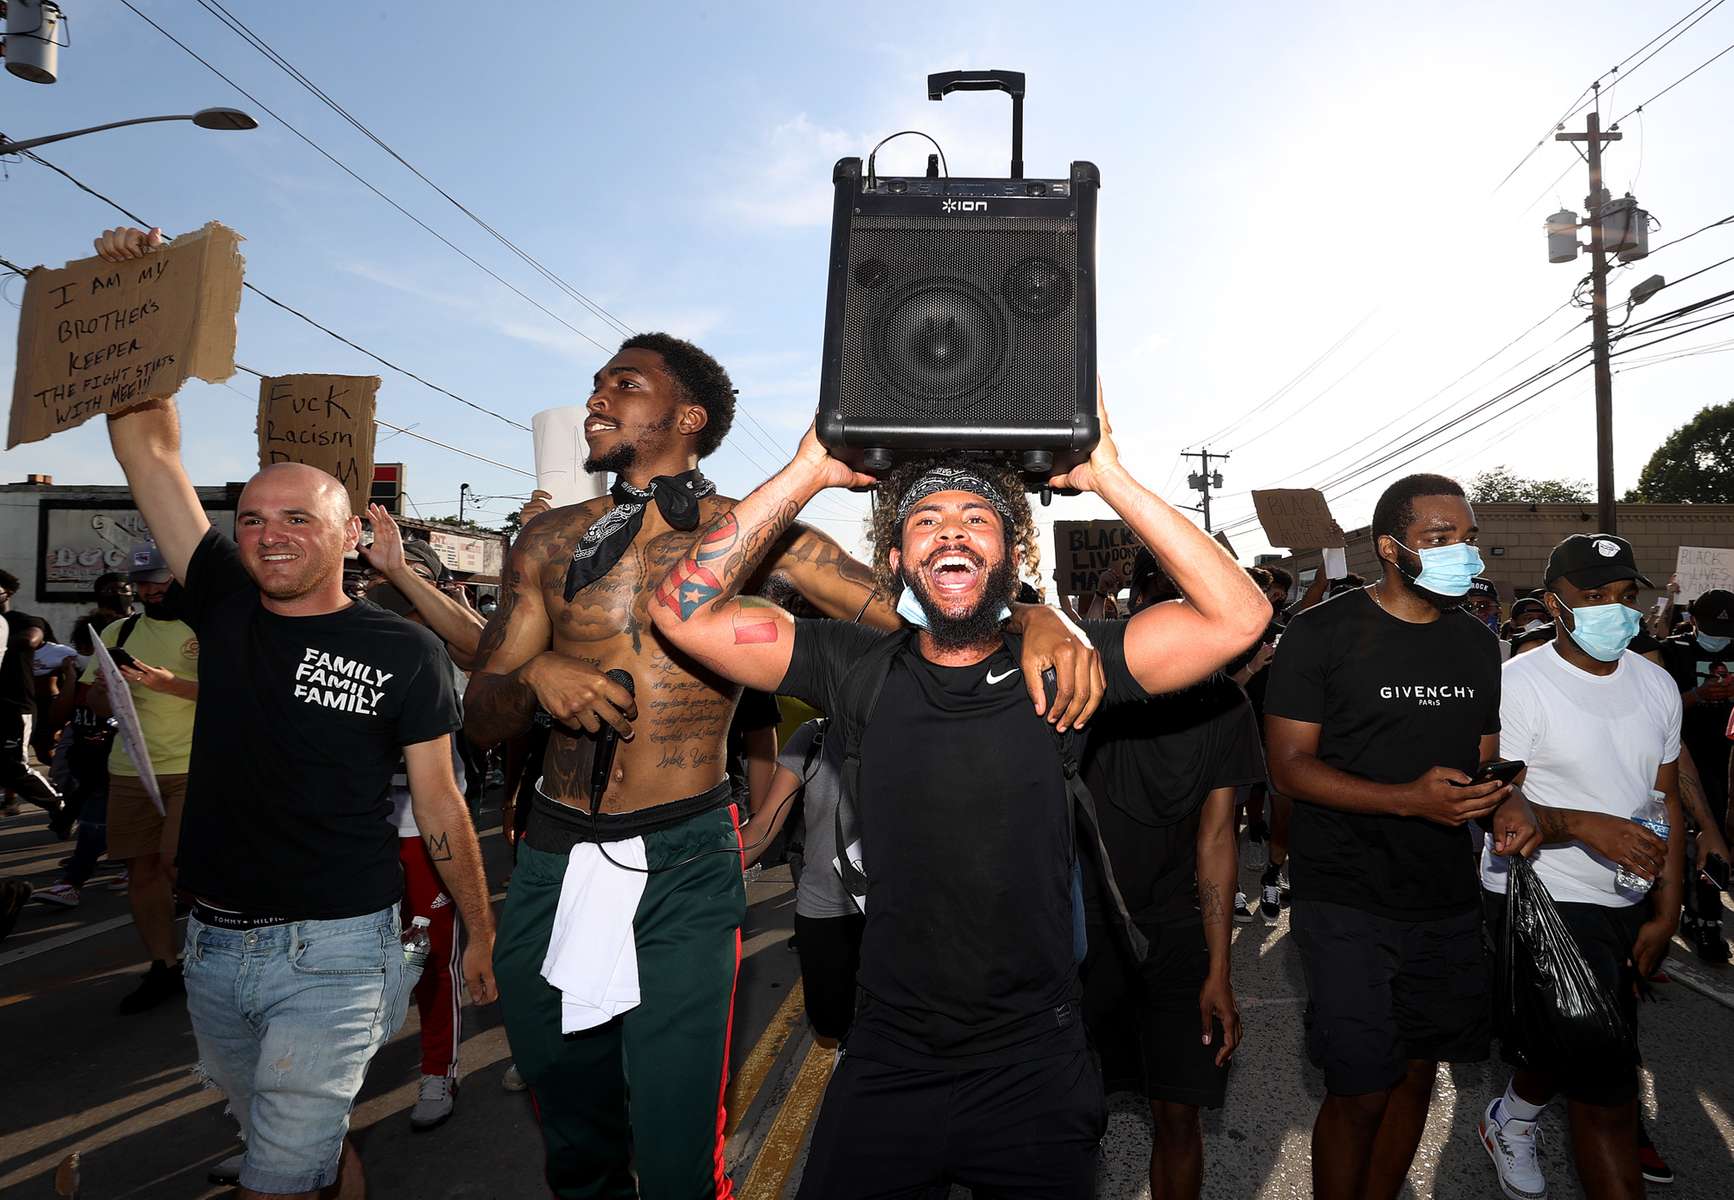 Protesters march to demonstrate the death of George Floyd on June 04, 2020 in Merrick, New York.  Minneapolis Police officer Derek Chauvin was filmed kneeling on George Floyd's neck. Floyd was later pronounced dead at a local hospital. Across the country, protests against Floyd's death have set off days and nights of rage as its the most recent in a series of deaths of black Americans by the police.  